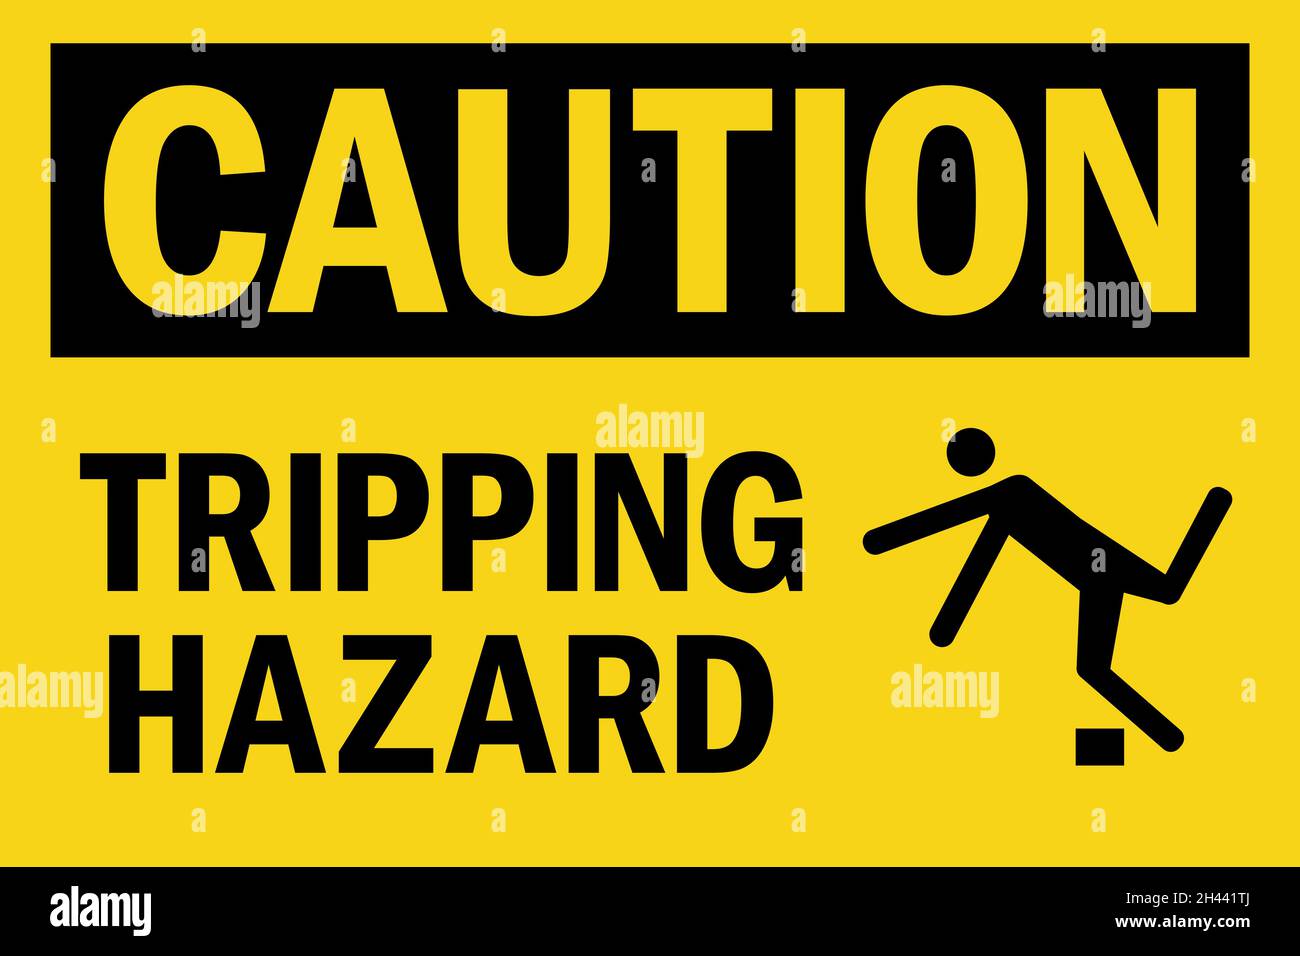 Tripping hazard caution sign. Black on yellow background. Health safety signs and symbols. Stock Vector